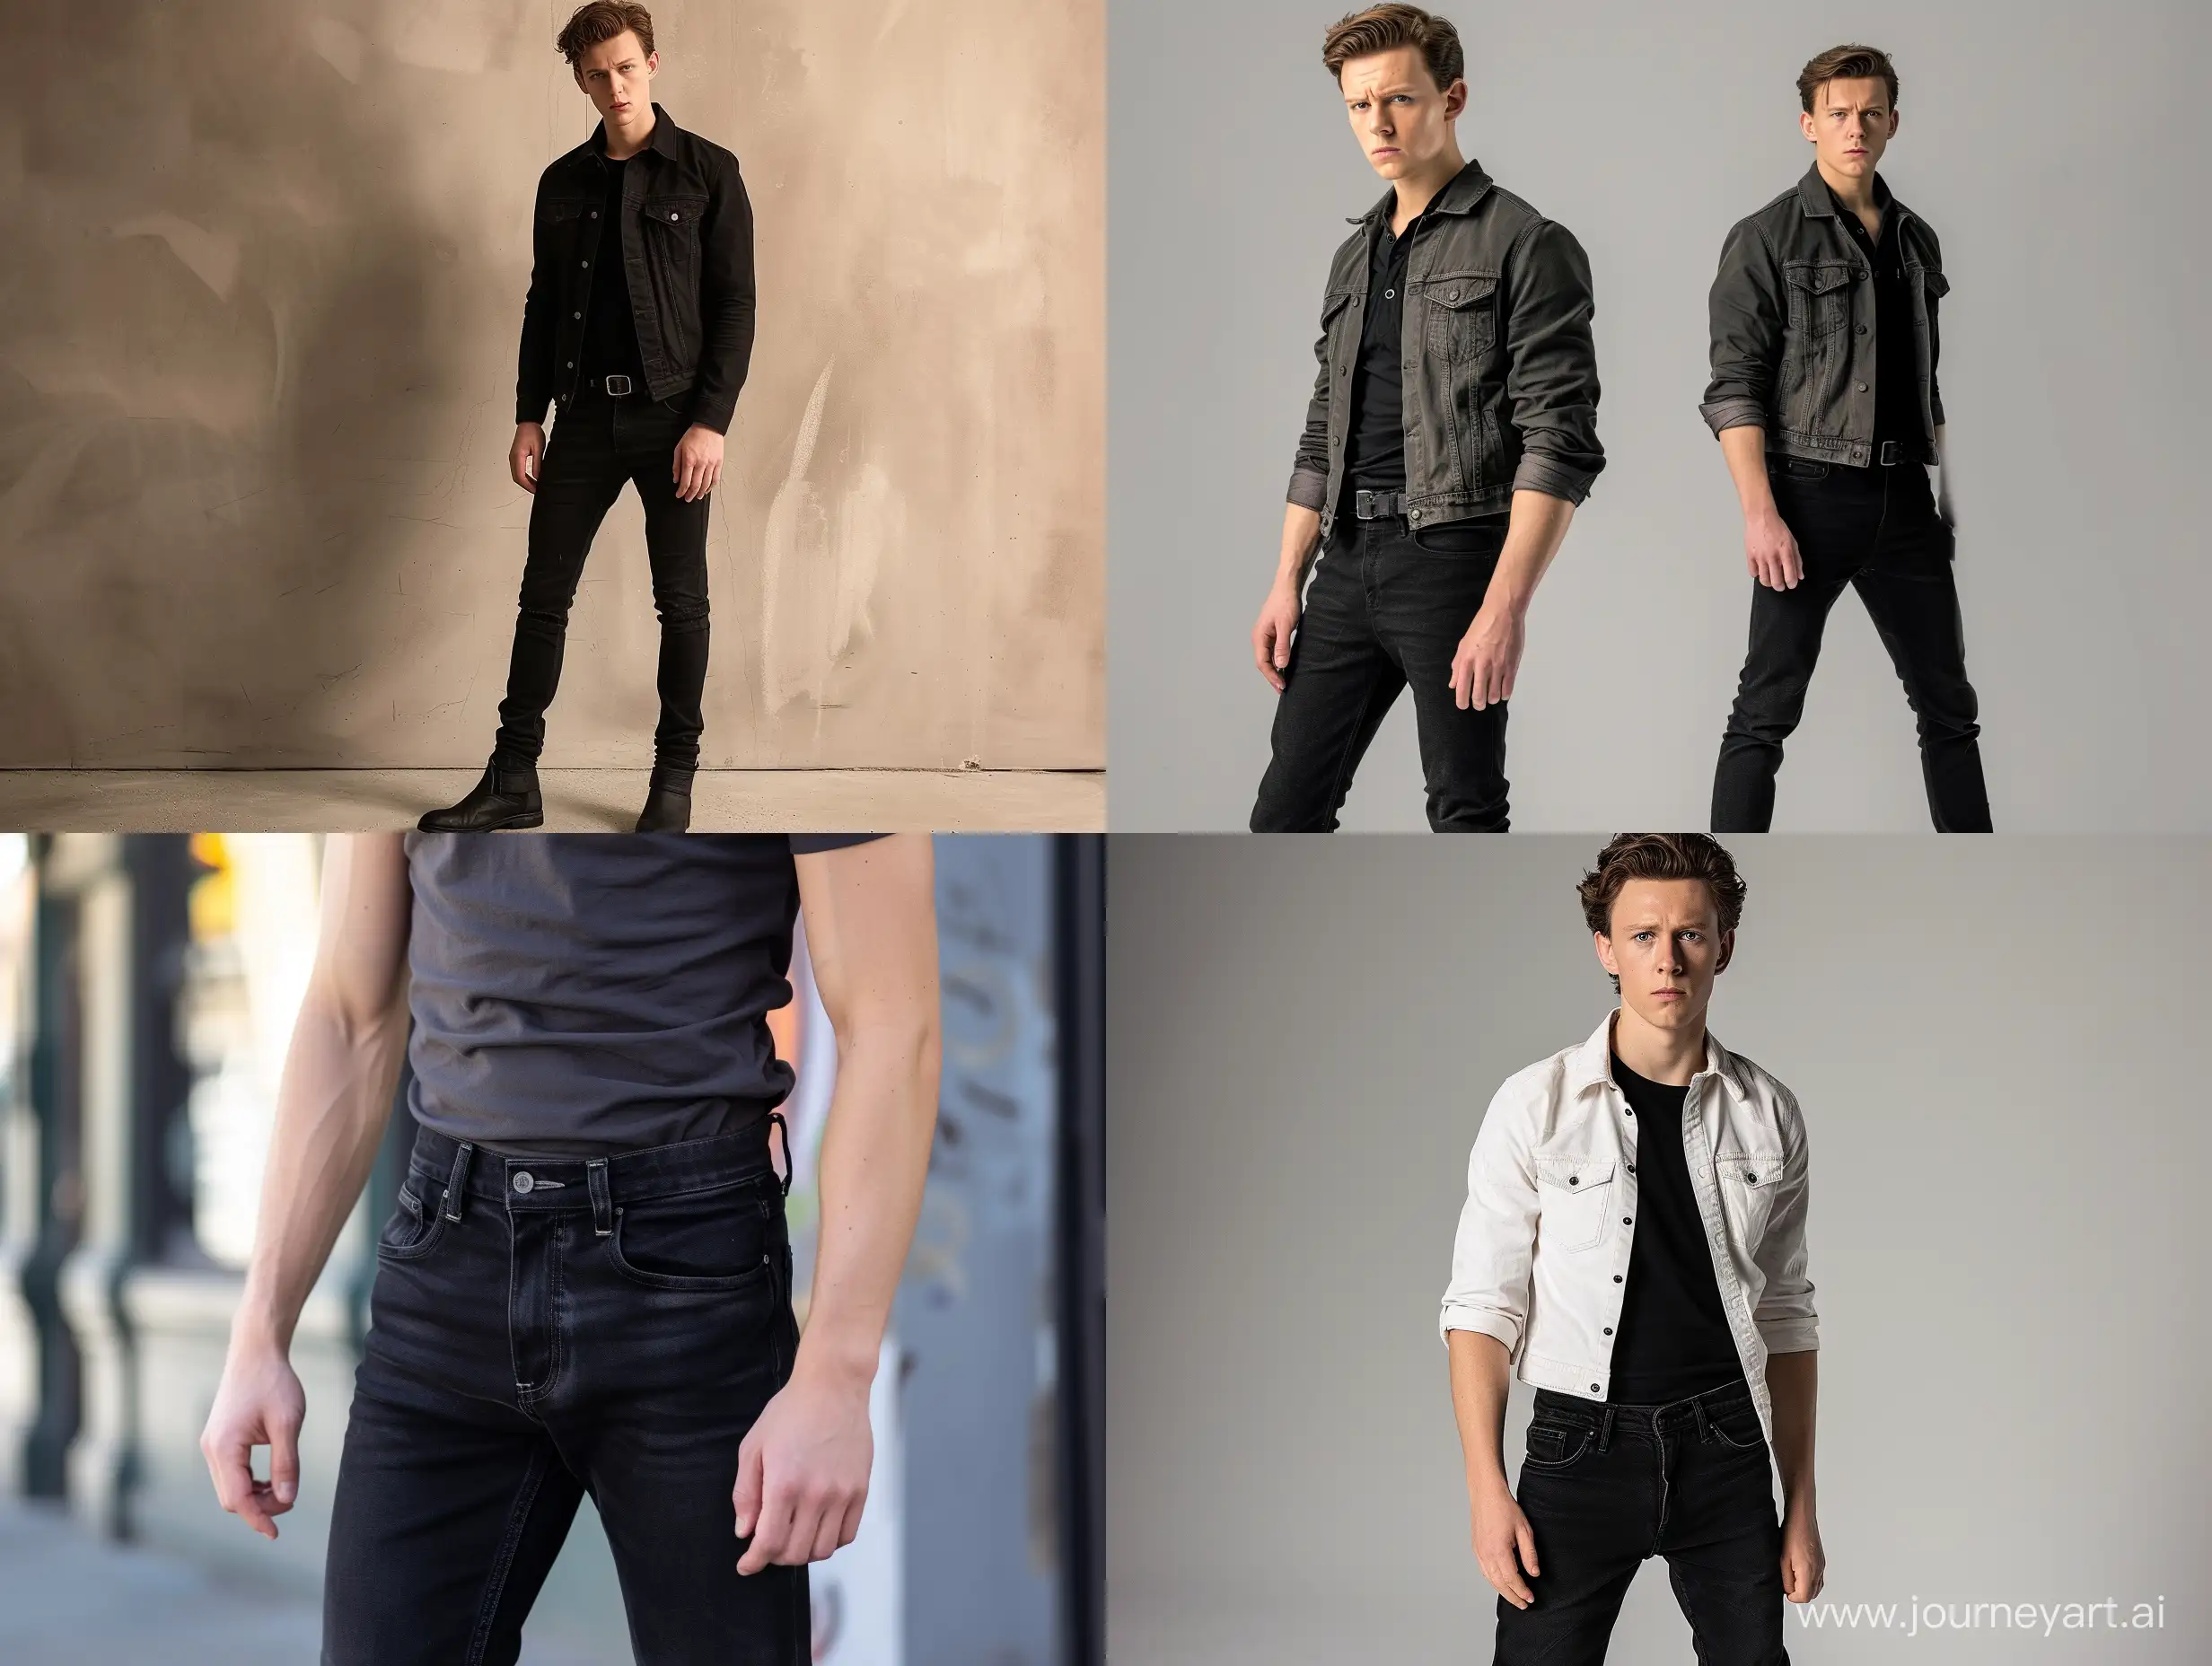 Tom-Holland-in-Stylish-Black-Jeans-Portrait